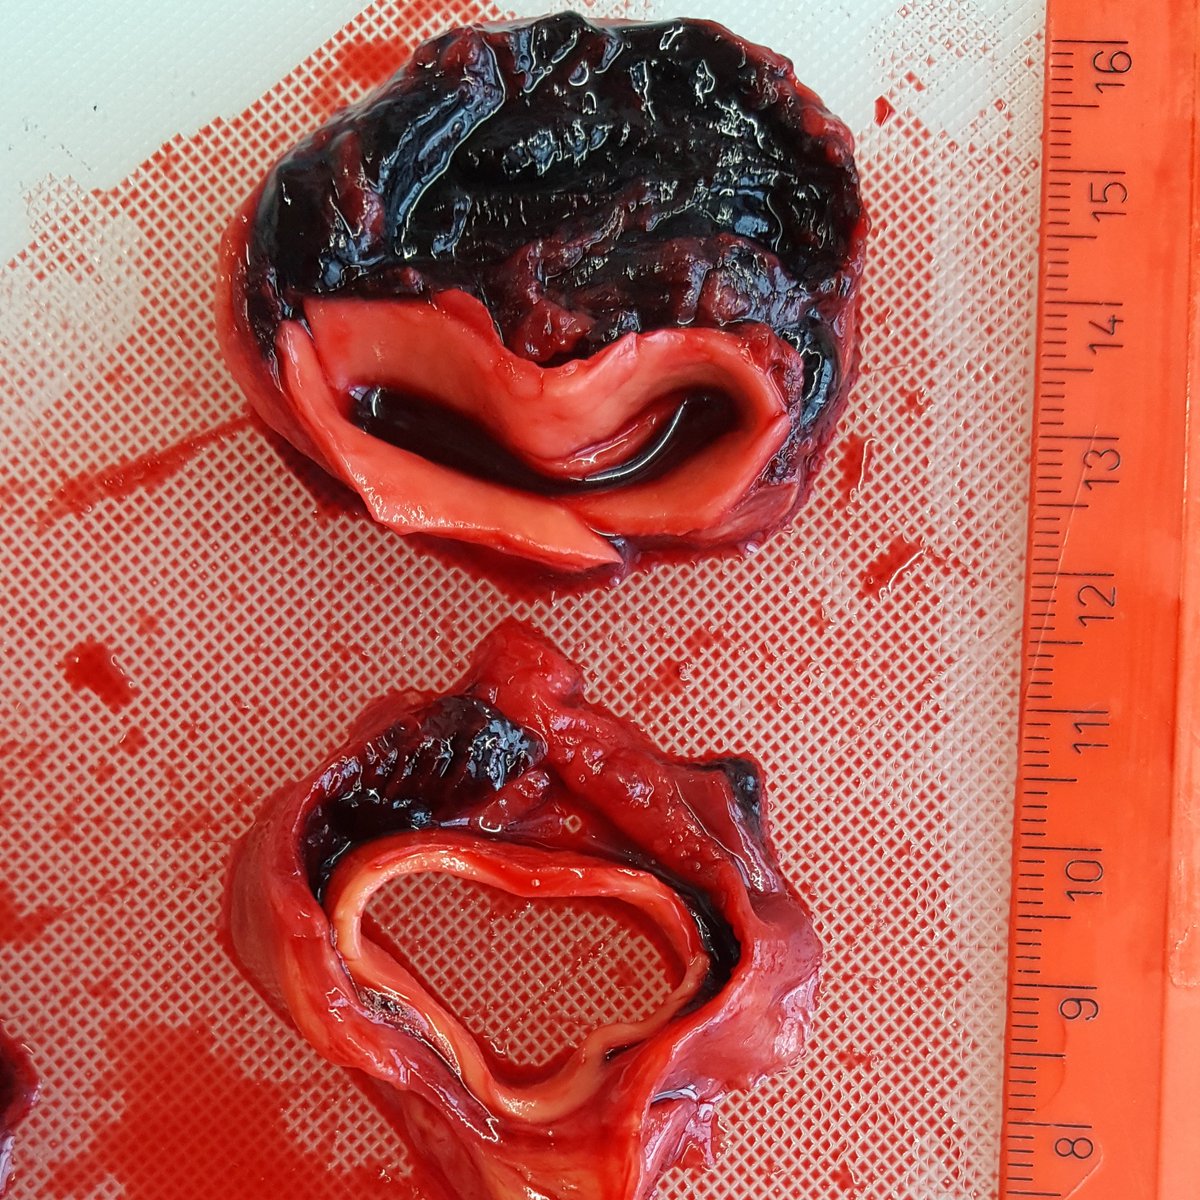 This is what a fresh #aortic #dissection with thrombosed false lumen looks like. One is not surprised that the false lumen tends to expand subsequently. 
#aortaed #aorticsurgery #vascularsurgery #aorta